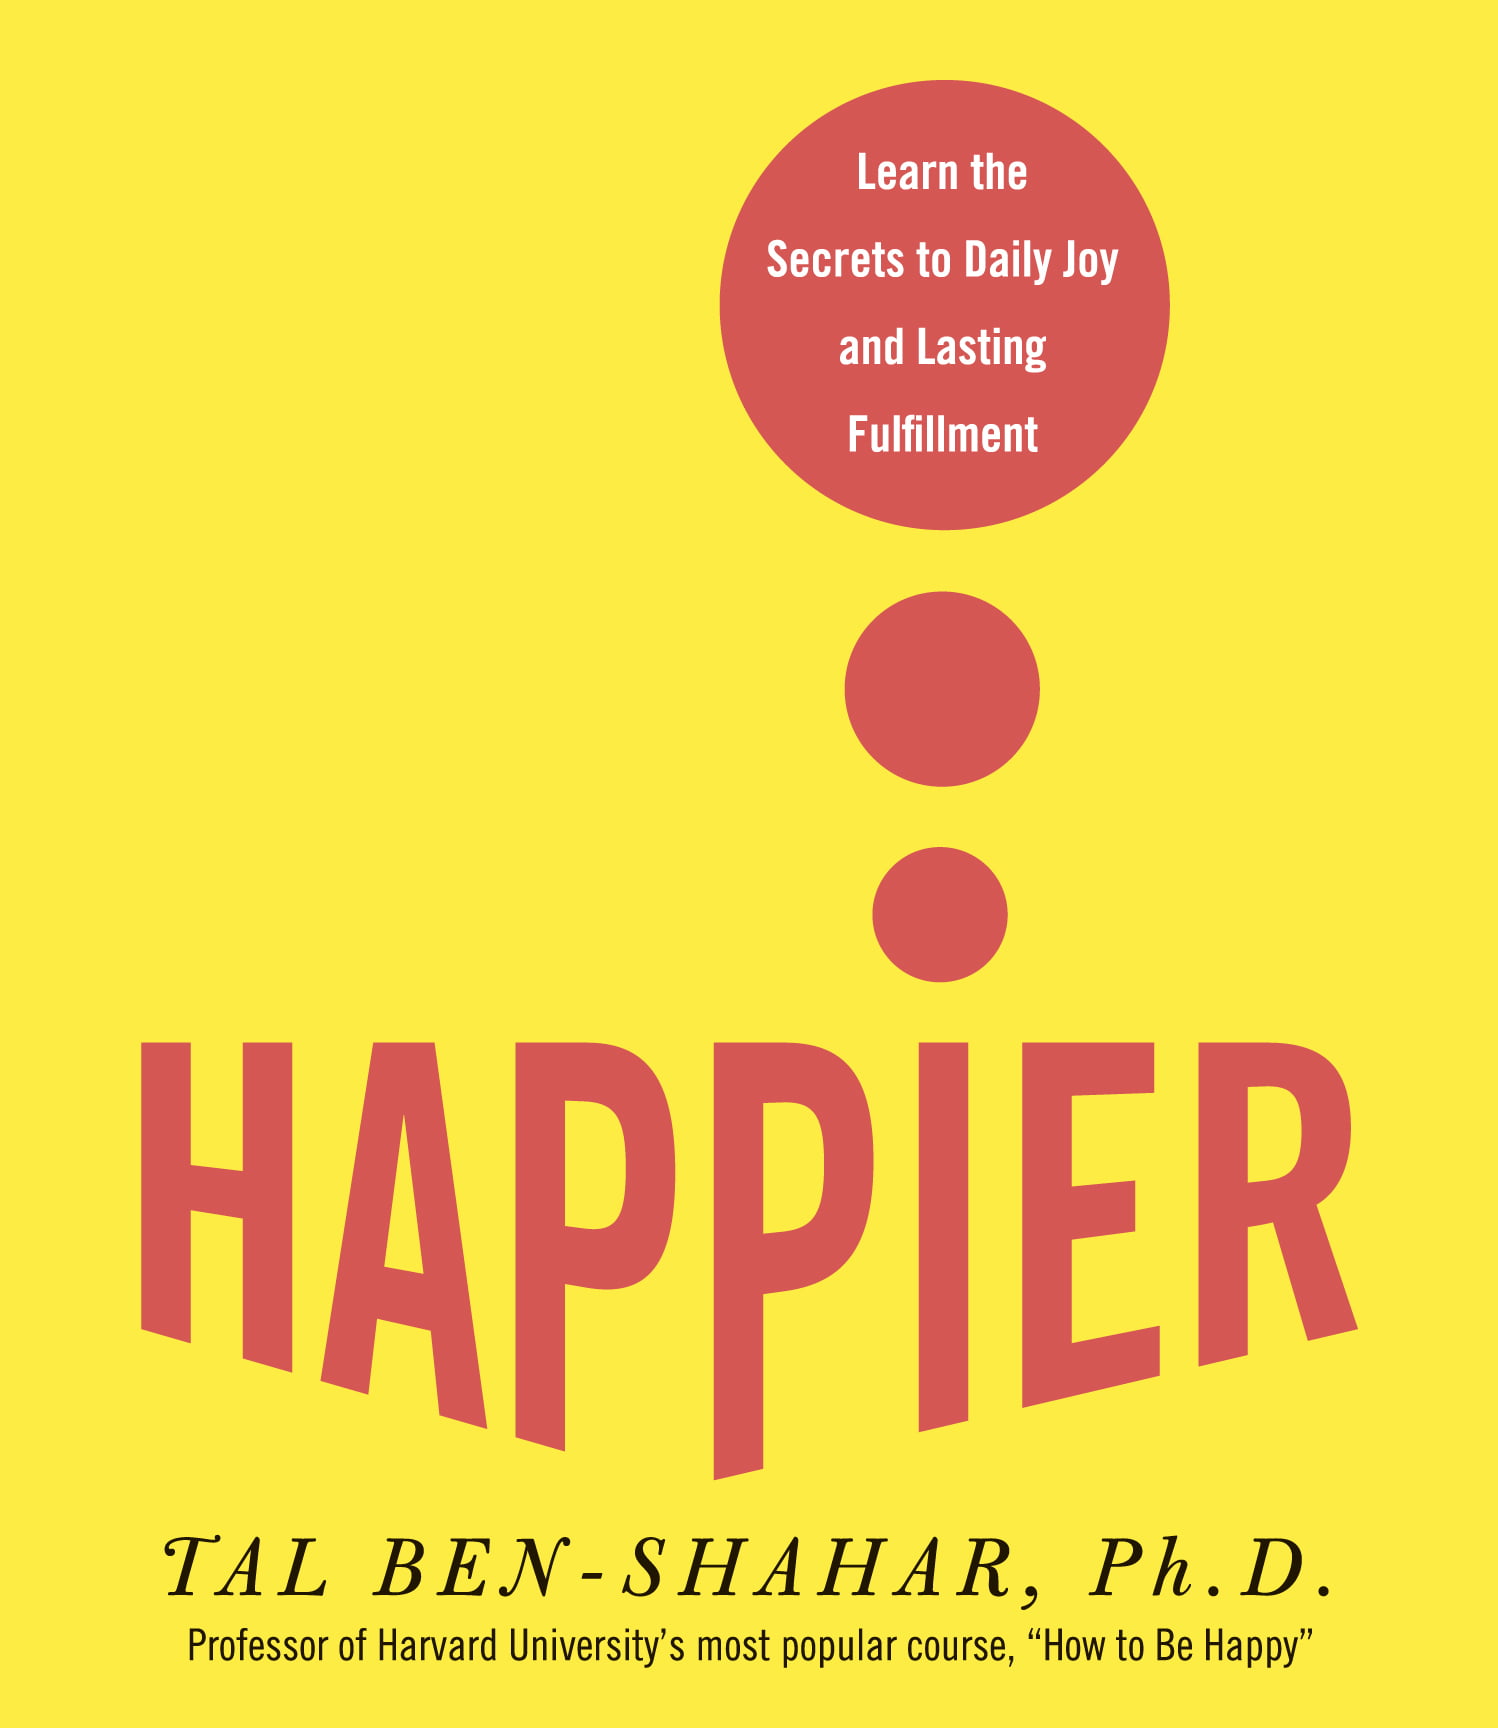 you happier book review